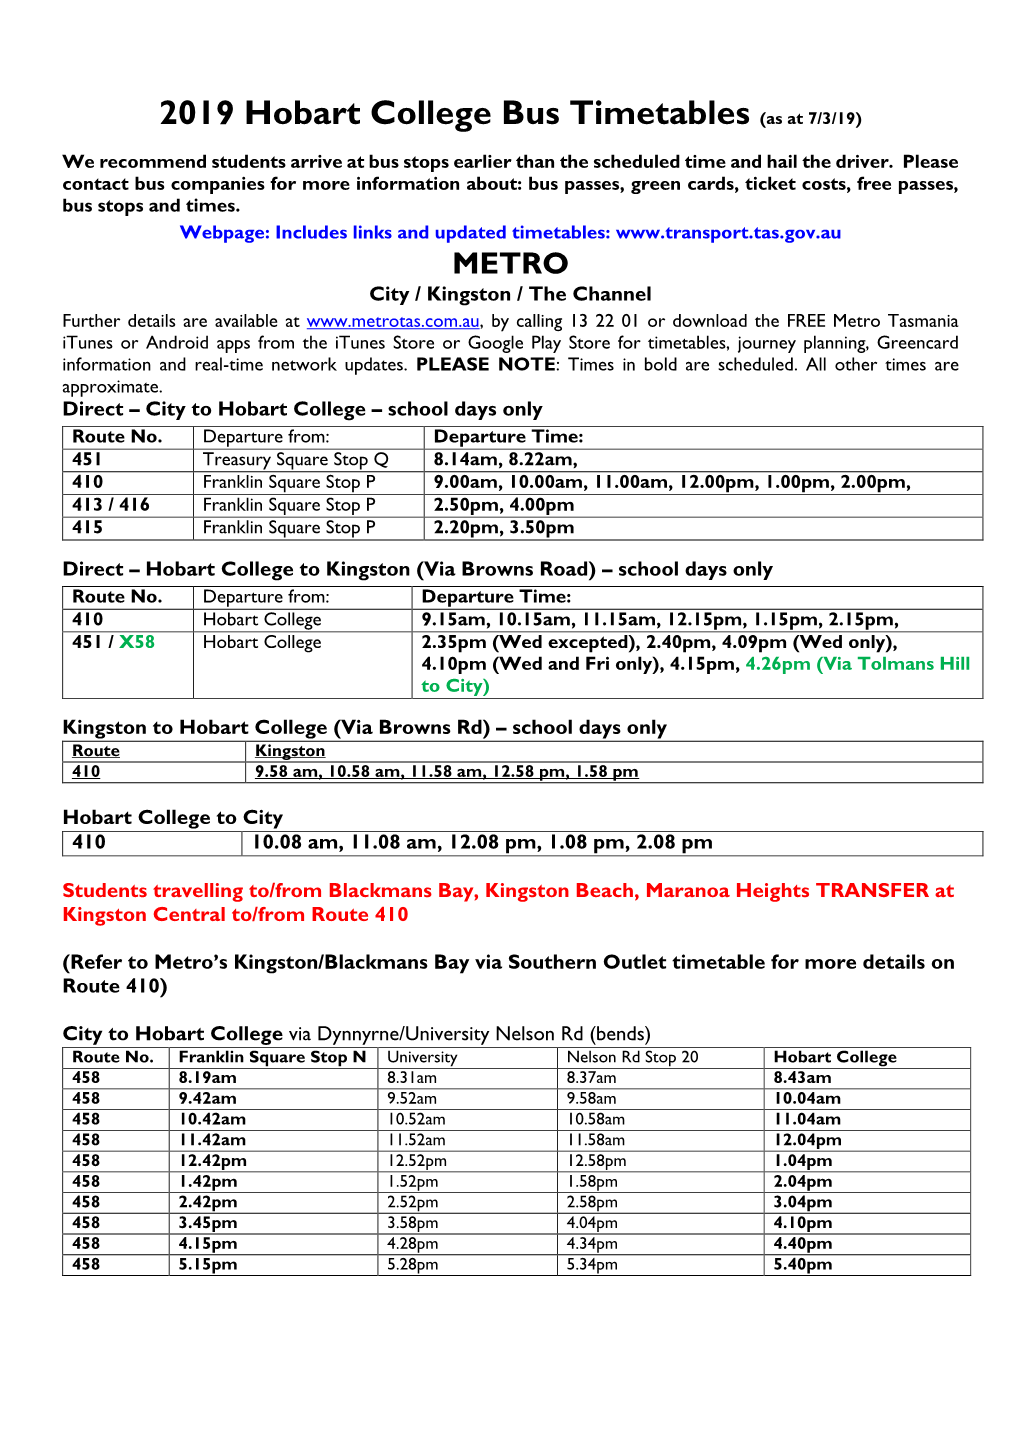 2019 Hobart College Bus Timetables (As at 7/3/19)